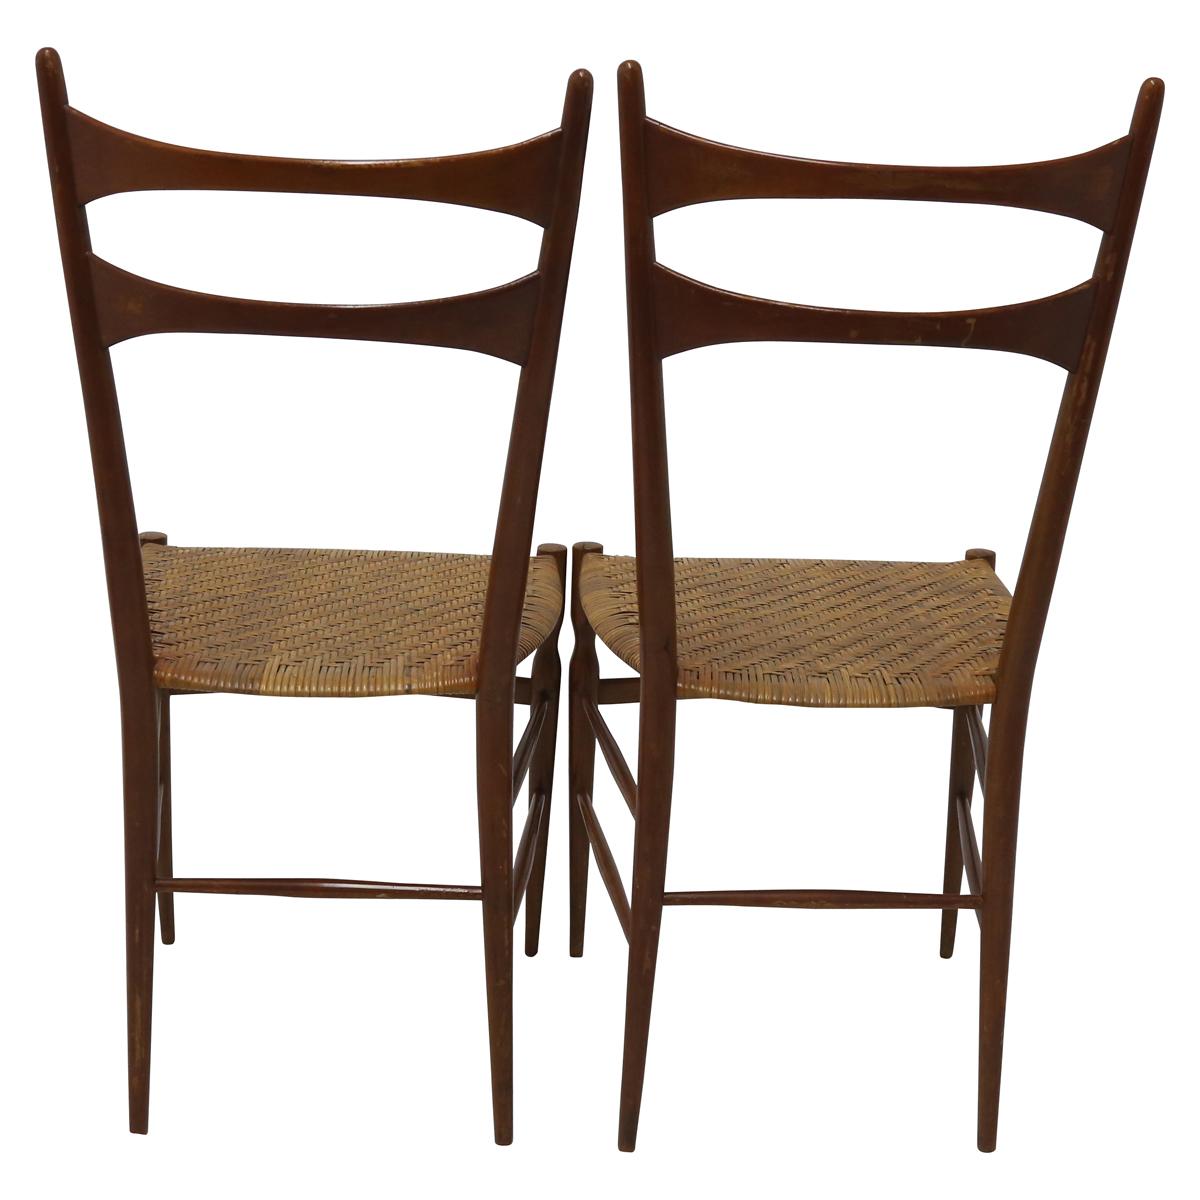 Italian Pair of Ladder Back Chairs with Woven Rattan Seats in the Manner of Gio Ponti